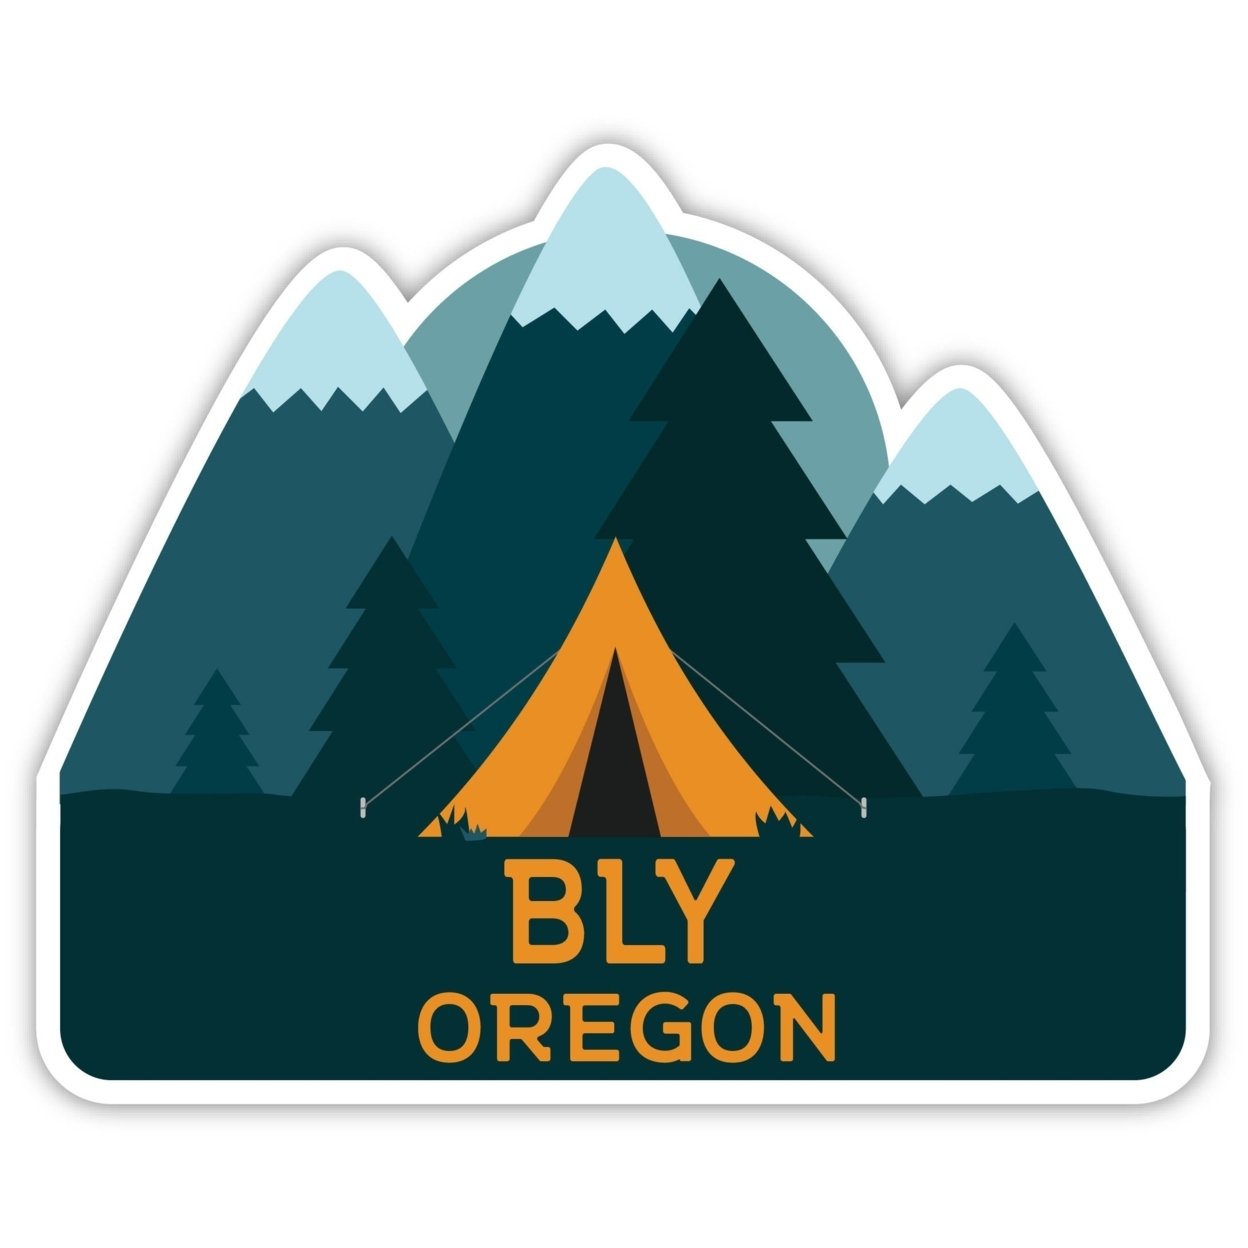 Bly Oregon Souvenir Decorative Stickers (Choose Theme And Size) - 4-Pack, 2-Inch, Tent